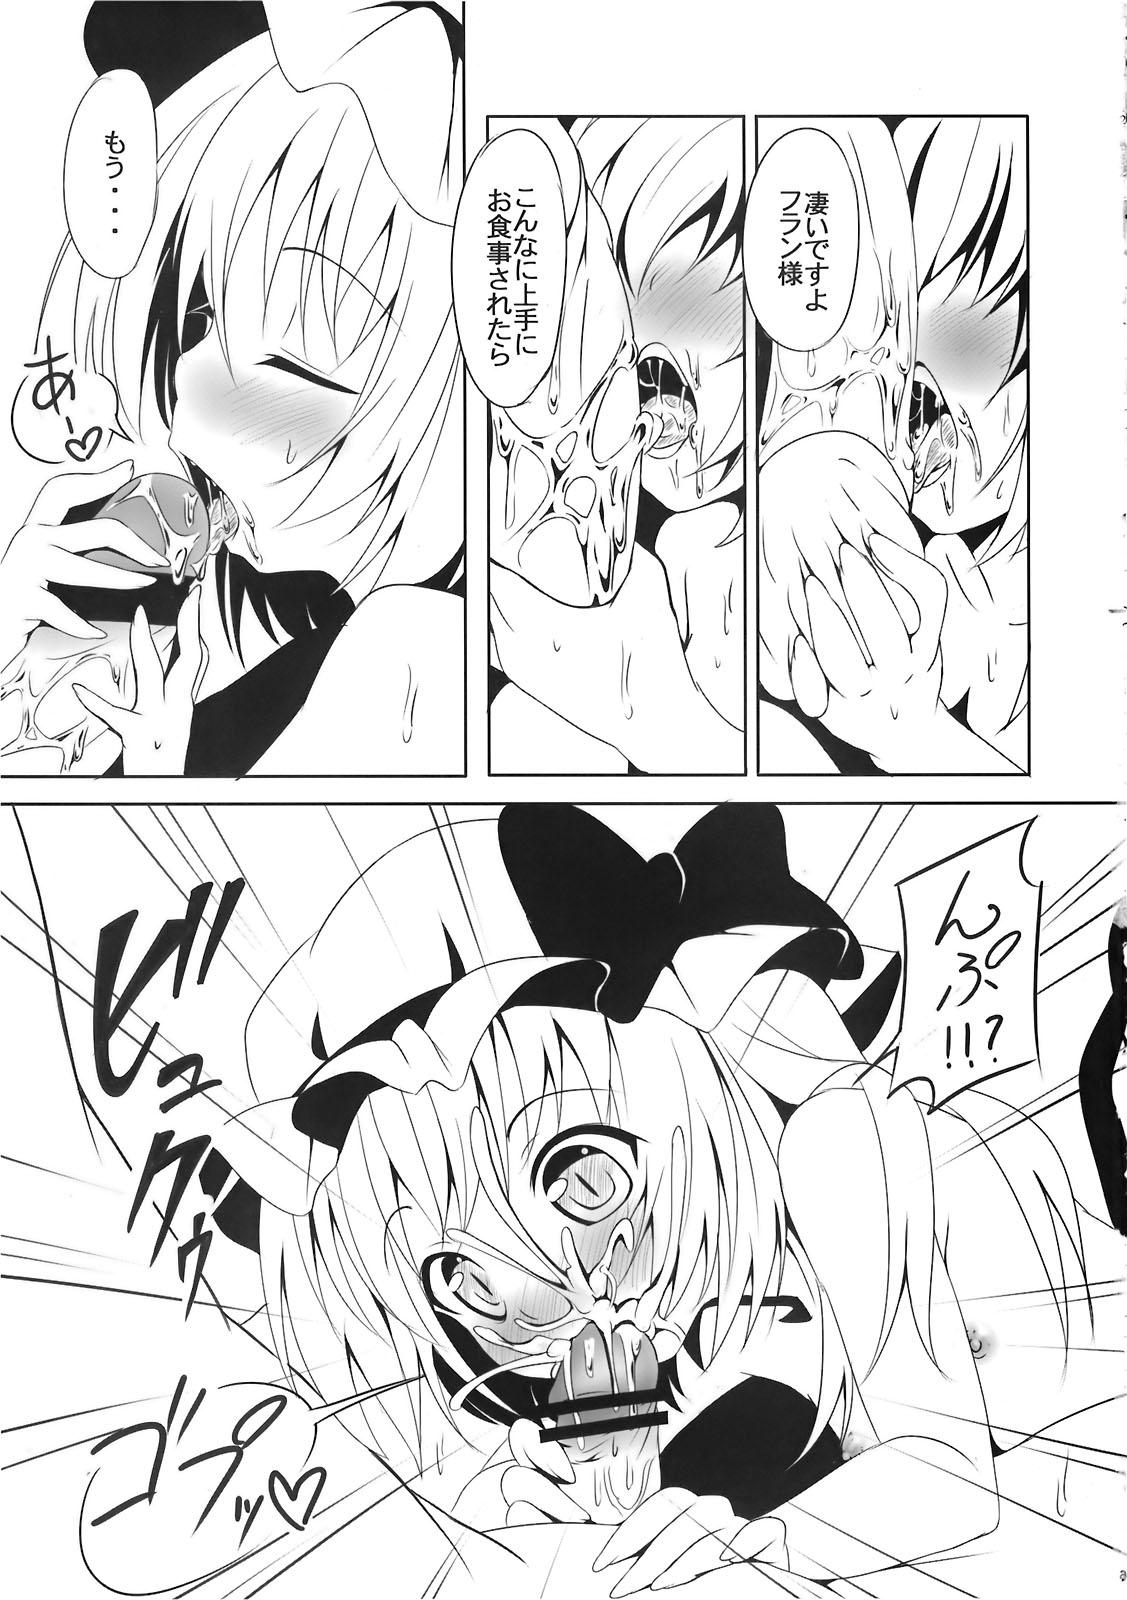 Joven franfran - Touhou project Blowjob - Page 7